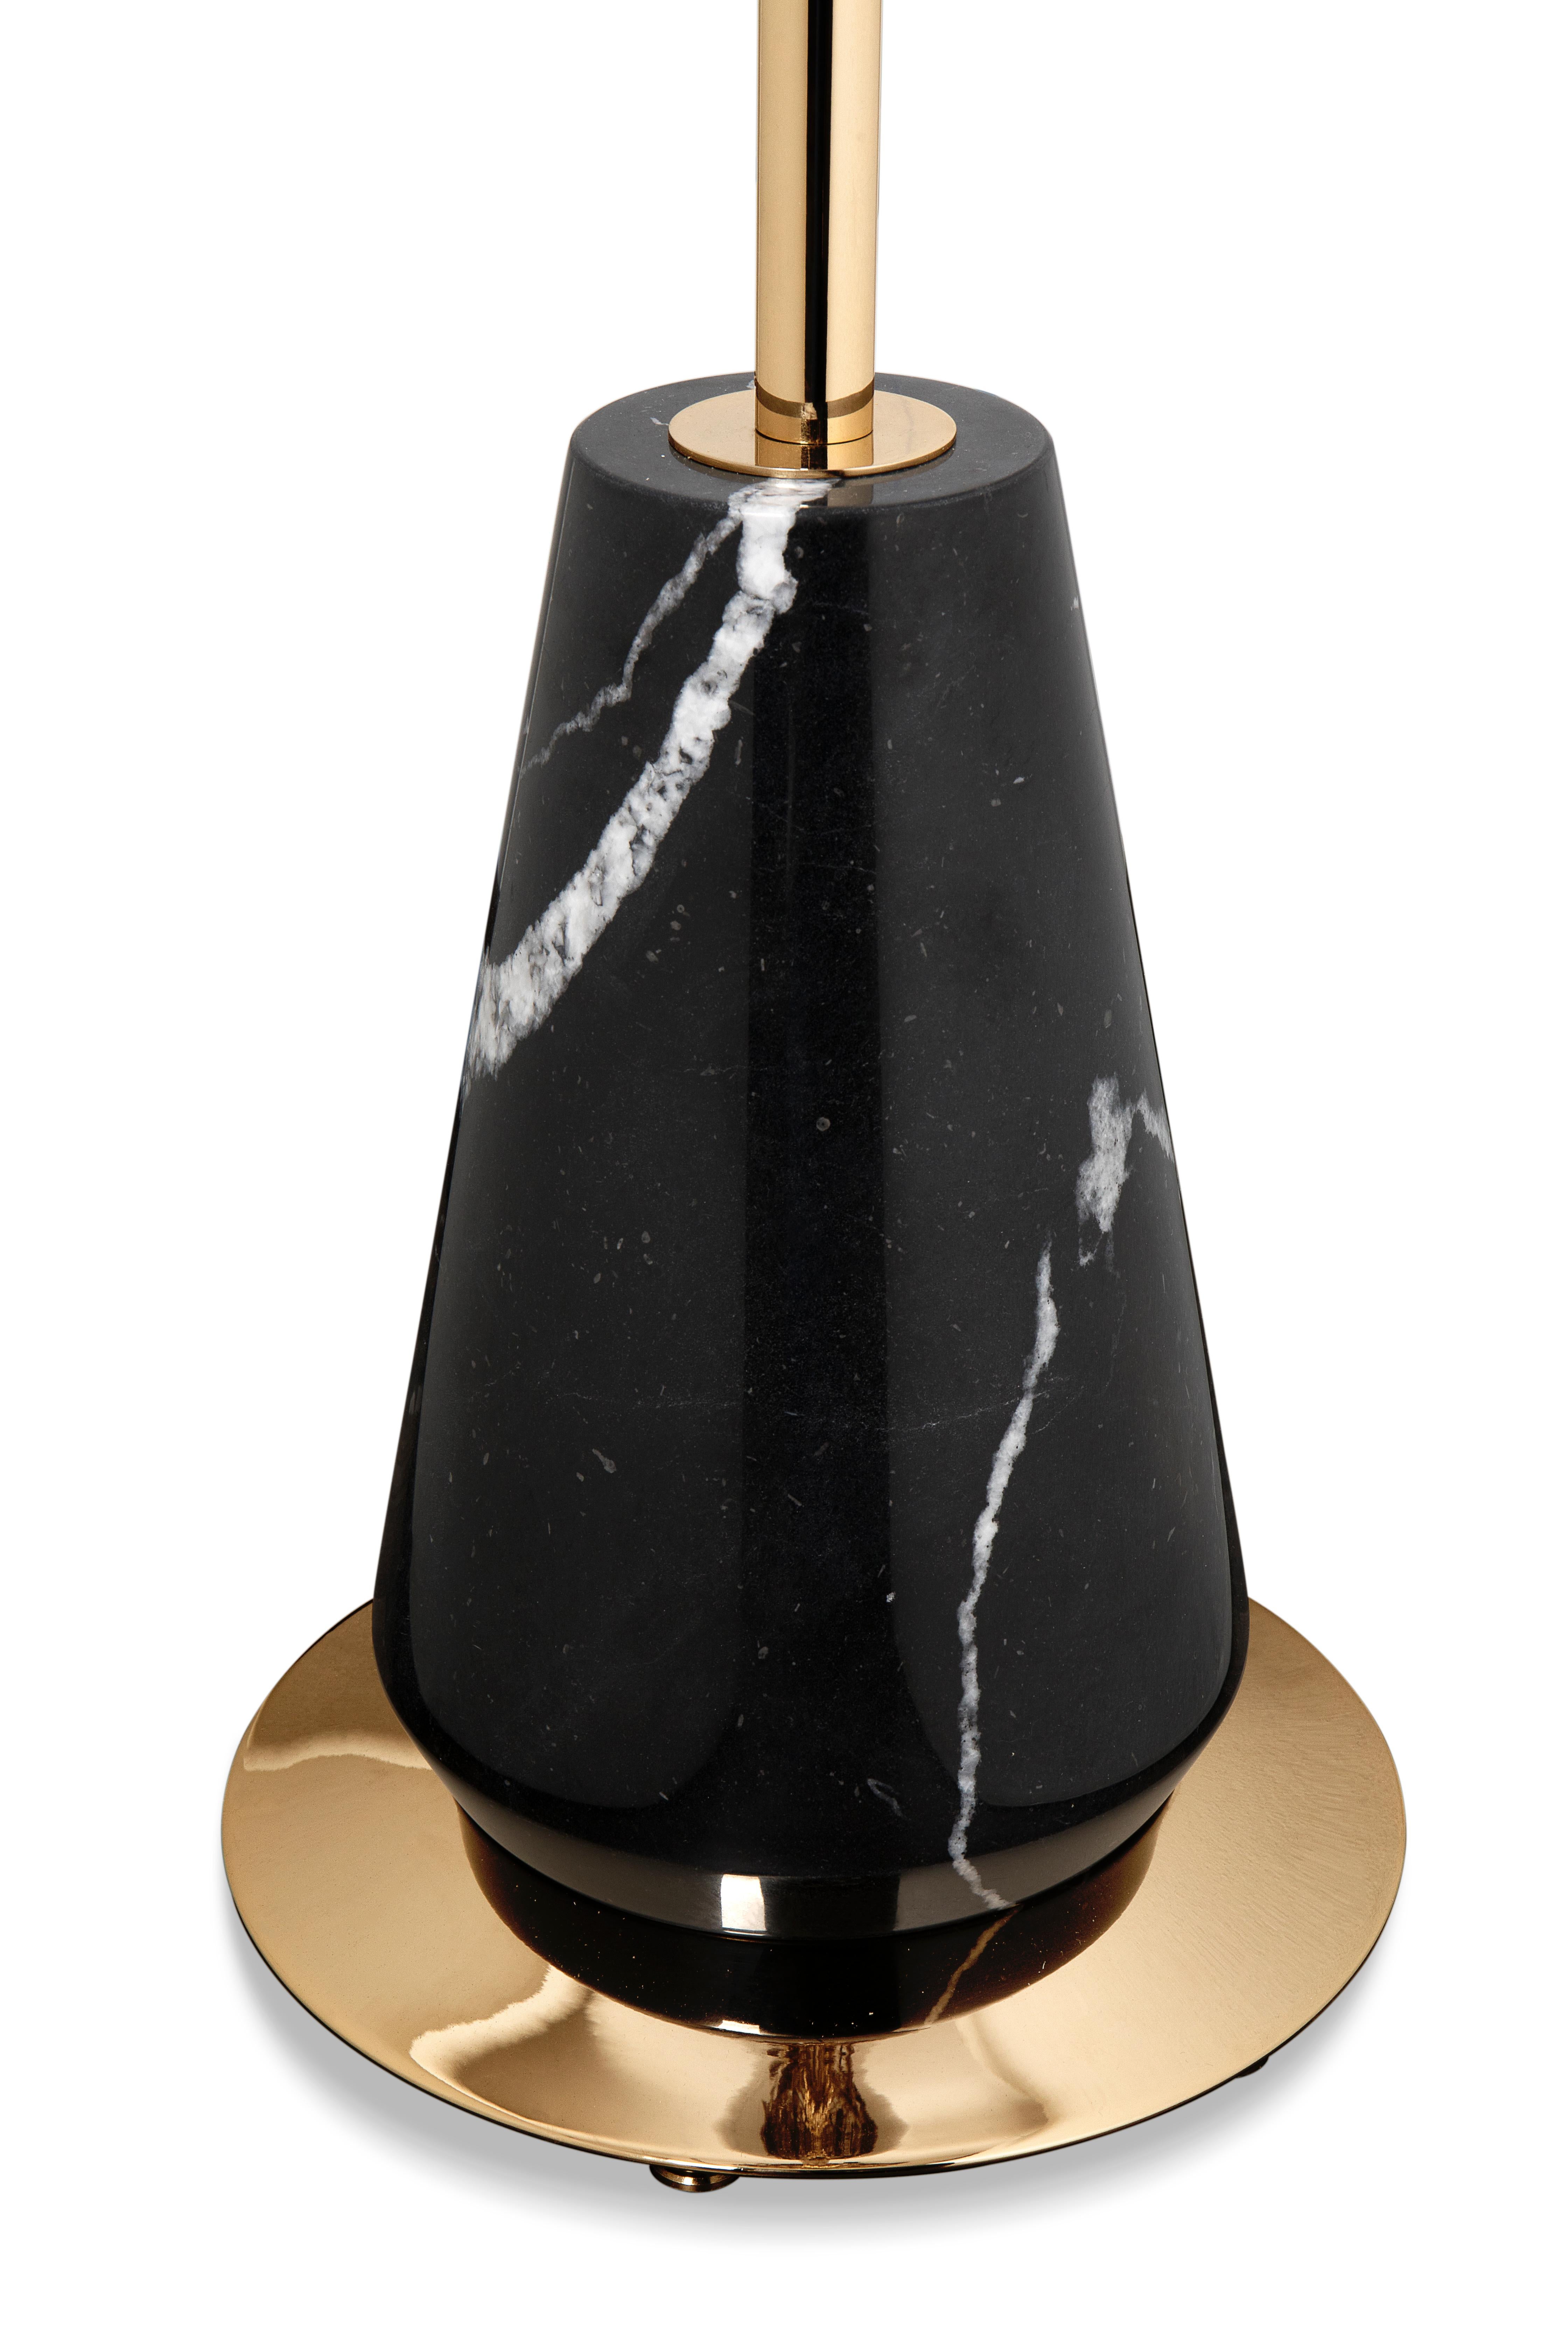 Portuguese McQueen Floor Lamp in Gold-Plated Brass, Marble and Swarovski Crystals For Sale